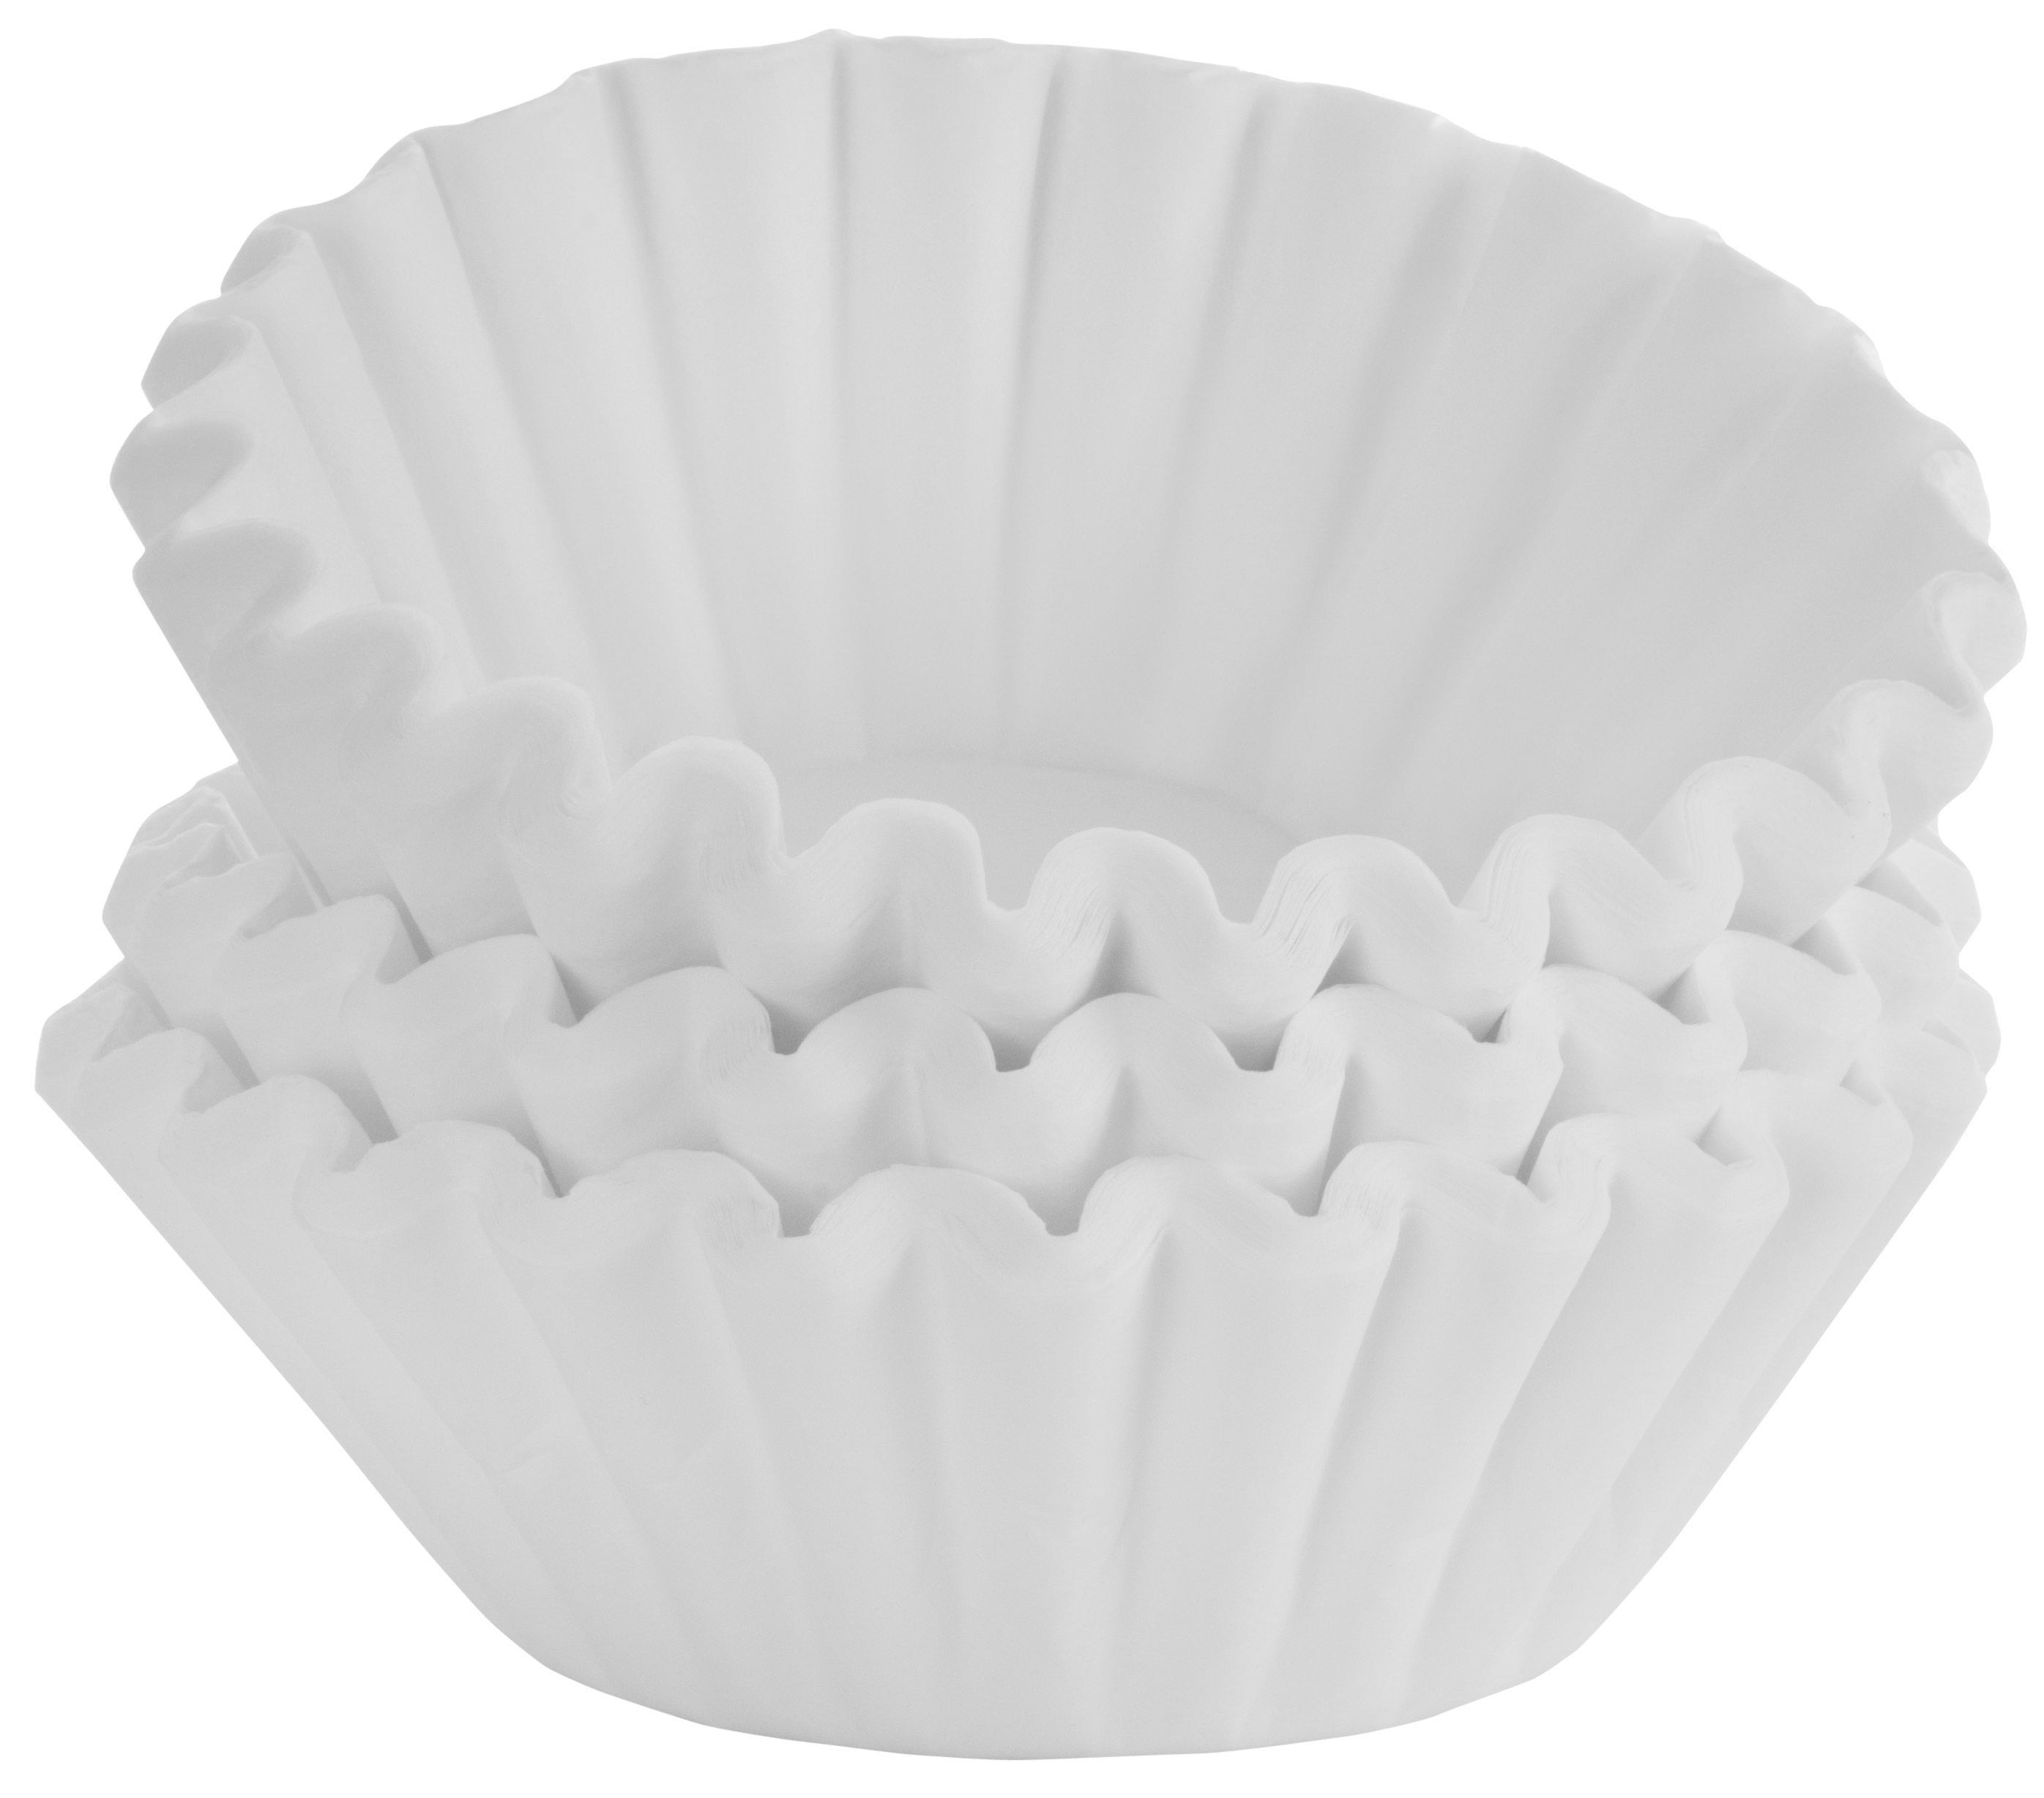 Tupkee Coffee Filters 8-12 Cups - 300 Count, Basket Style, White Paper, Chlorine Free Coffee Filter, Made in The USA